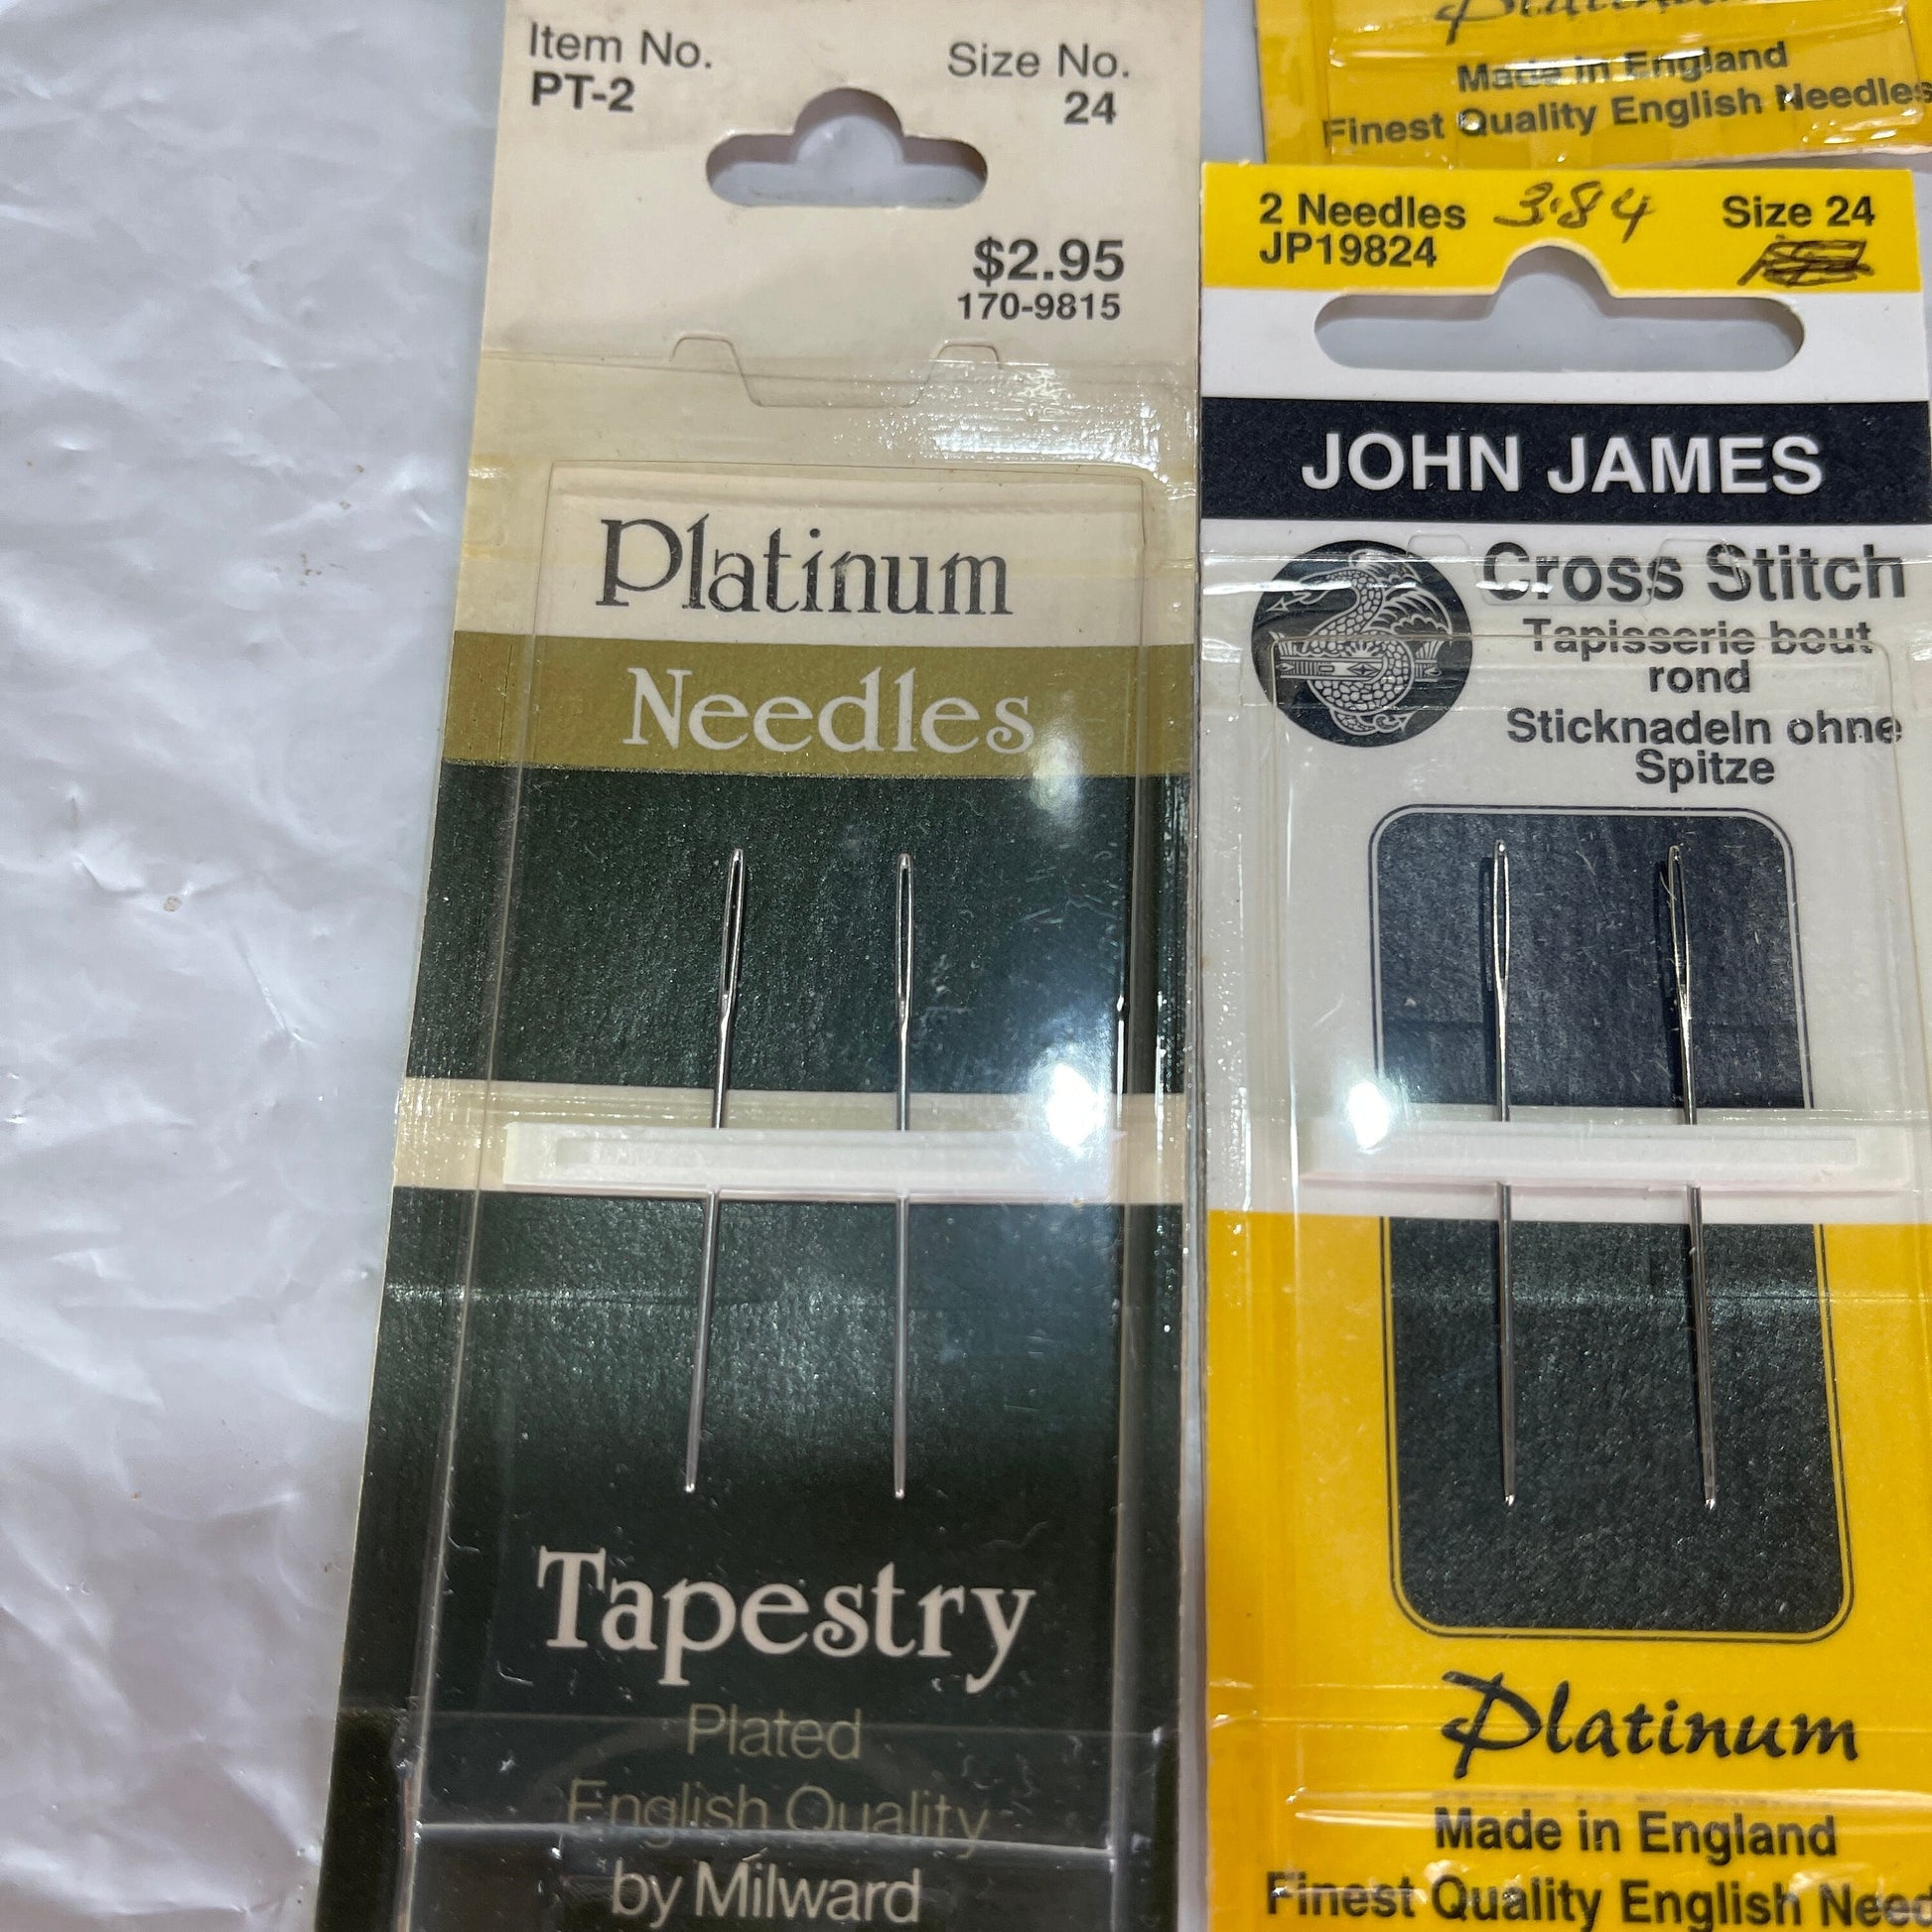 John James Cross Stitch & Millward Tapestry Needles Set Of 4 Packs See Pictures and Description For Details*